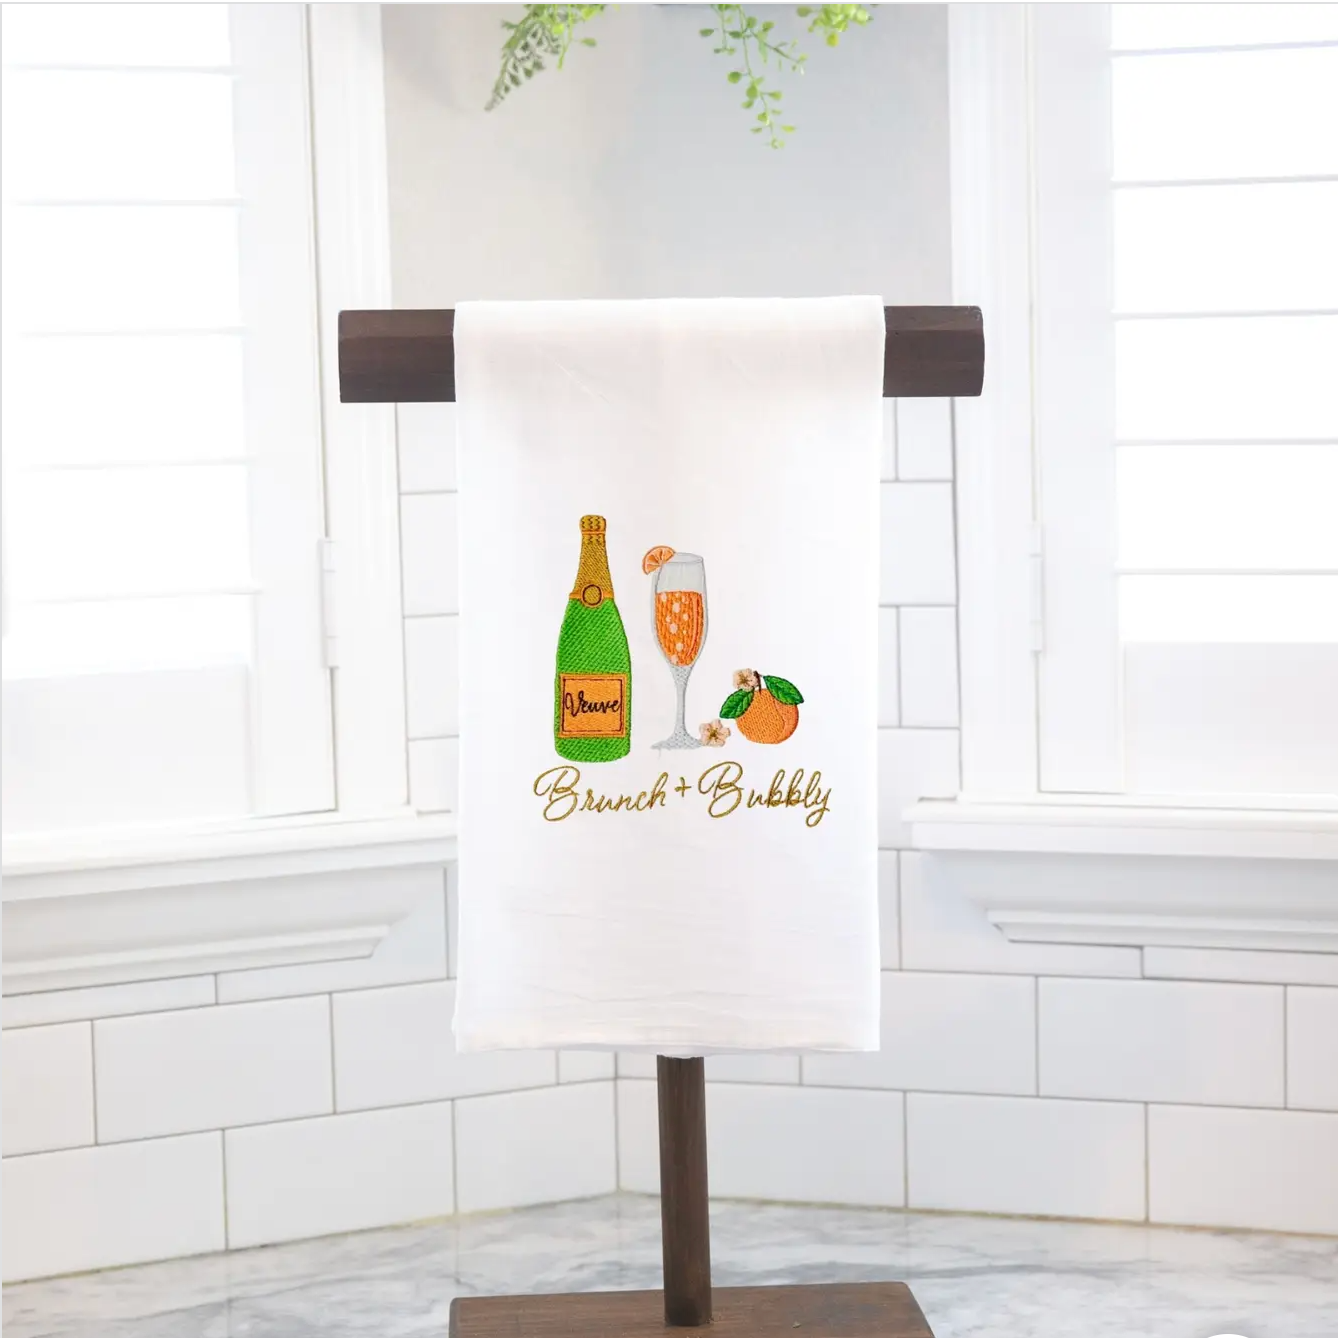 Tea Towel hanging on a wooden stand. The towel says "Brunch + Bubbly" and has an image of champagne, a glass, and an orange